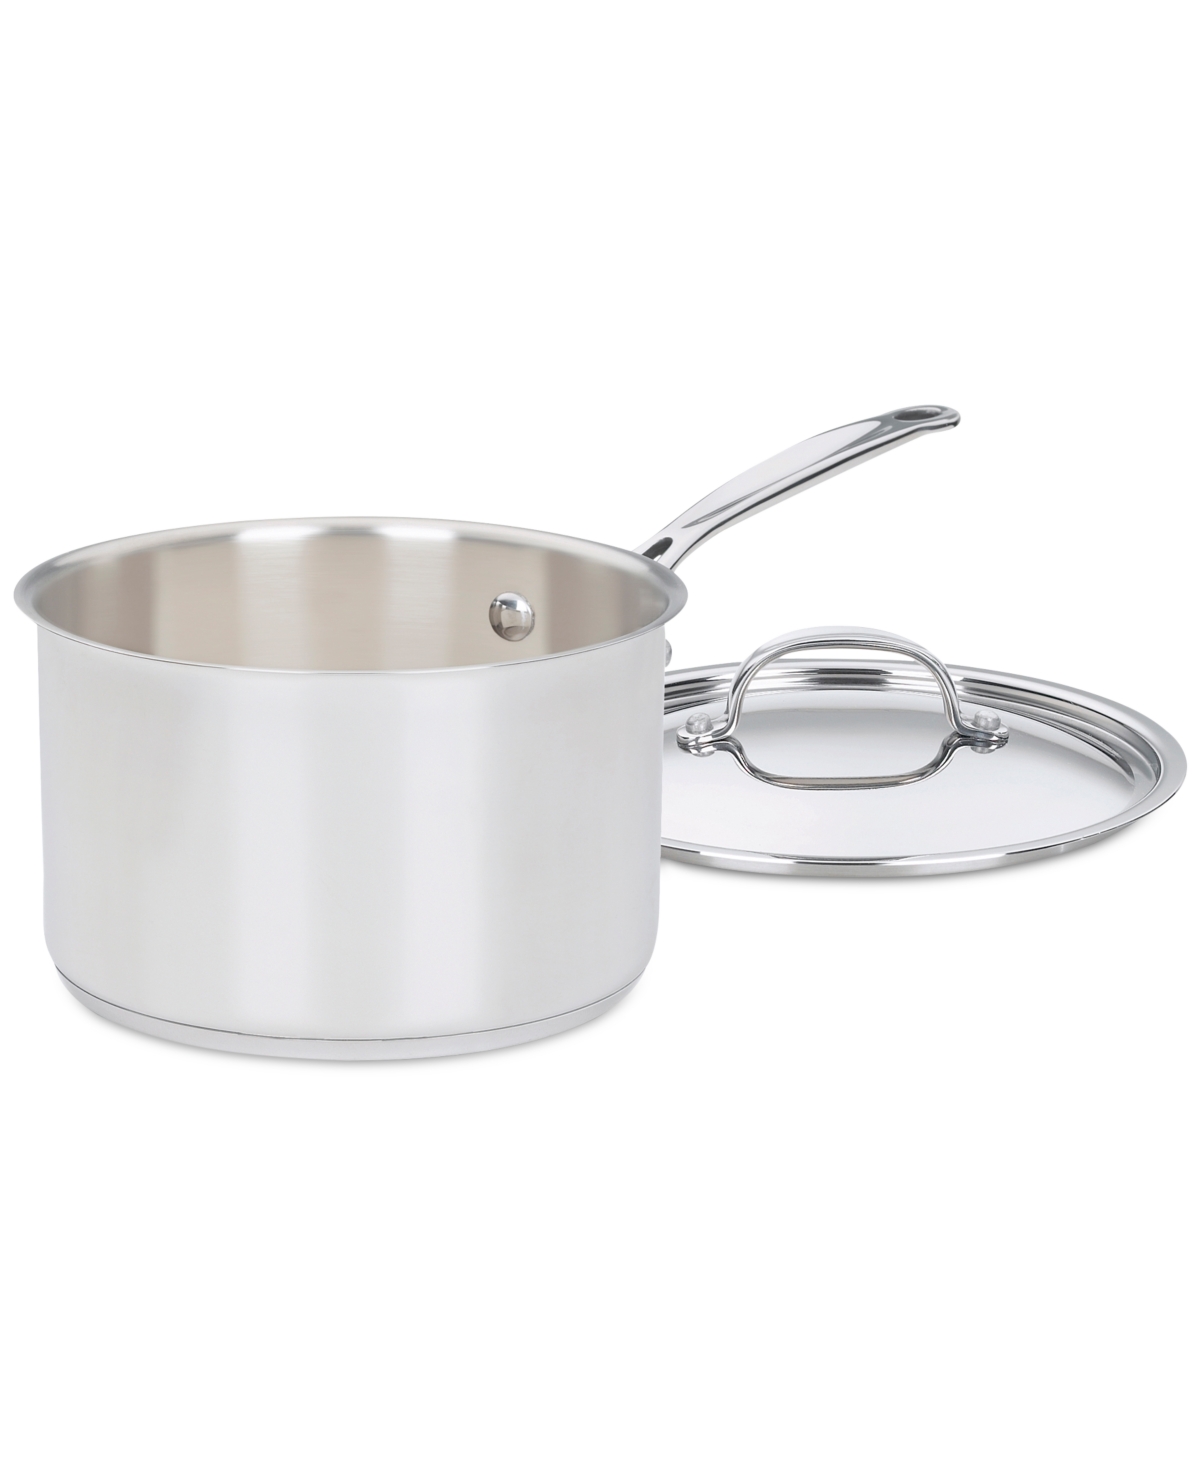 Cuisinart Chef's Classic Stainless Steel 4-qt. Covered Saucepan